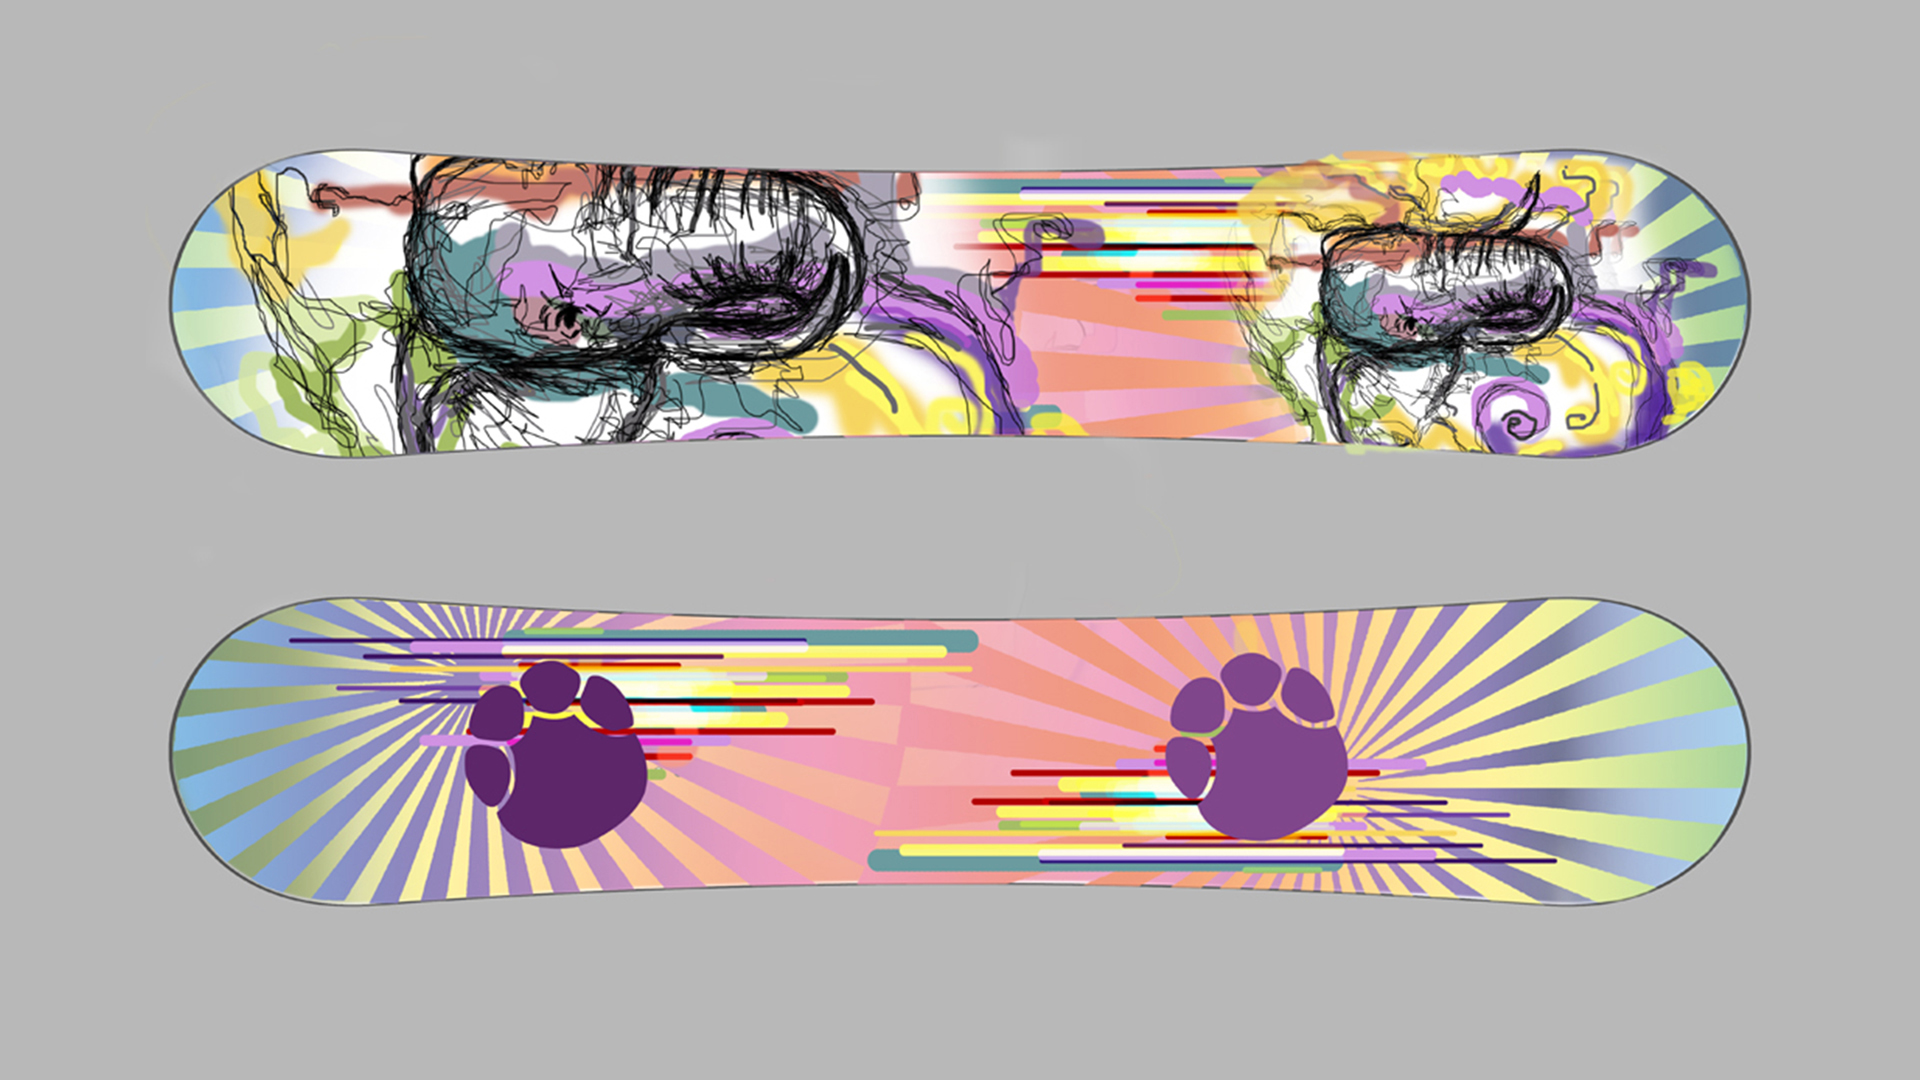 burton snowboards with the cut fingers